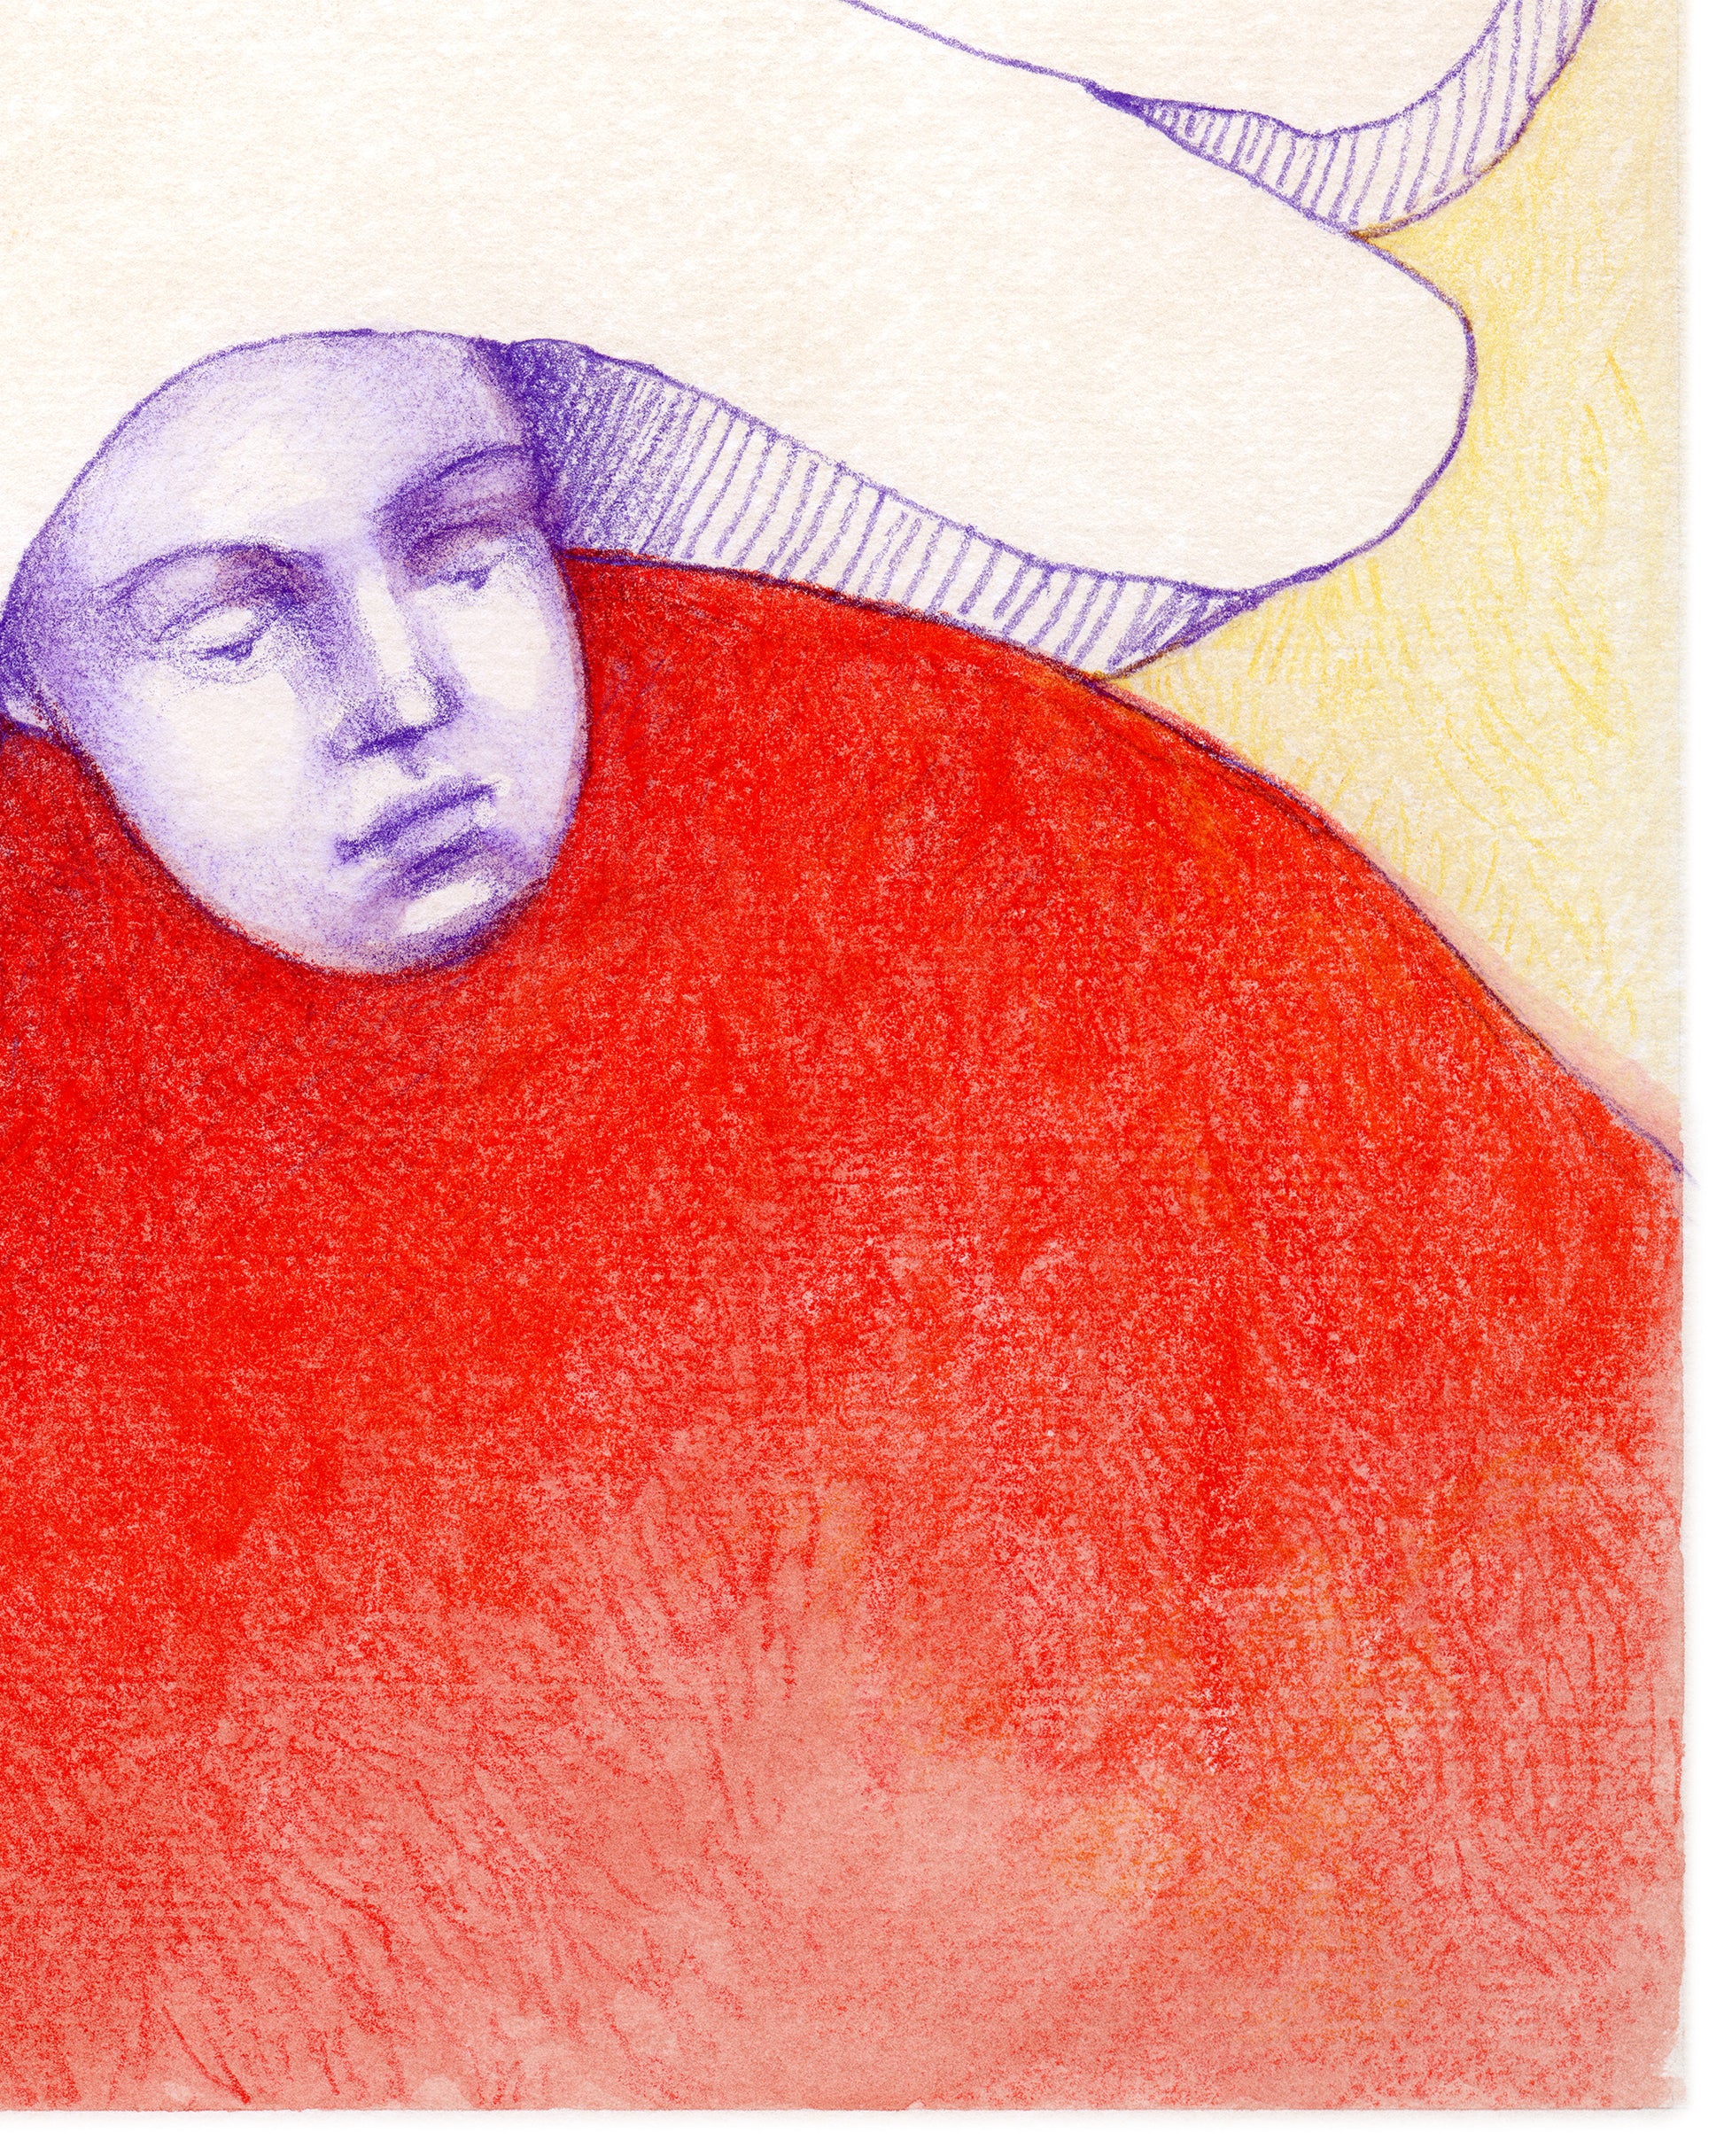 Surreal colored pencil drawing of a figure with pillow shapes on their head.